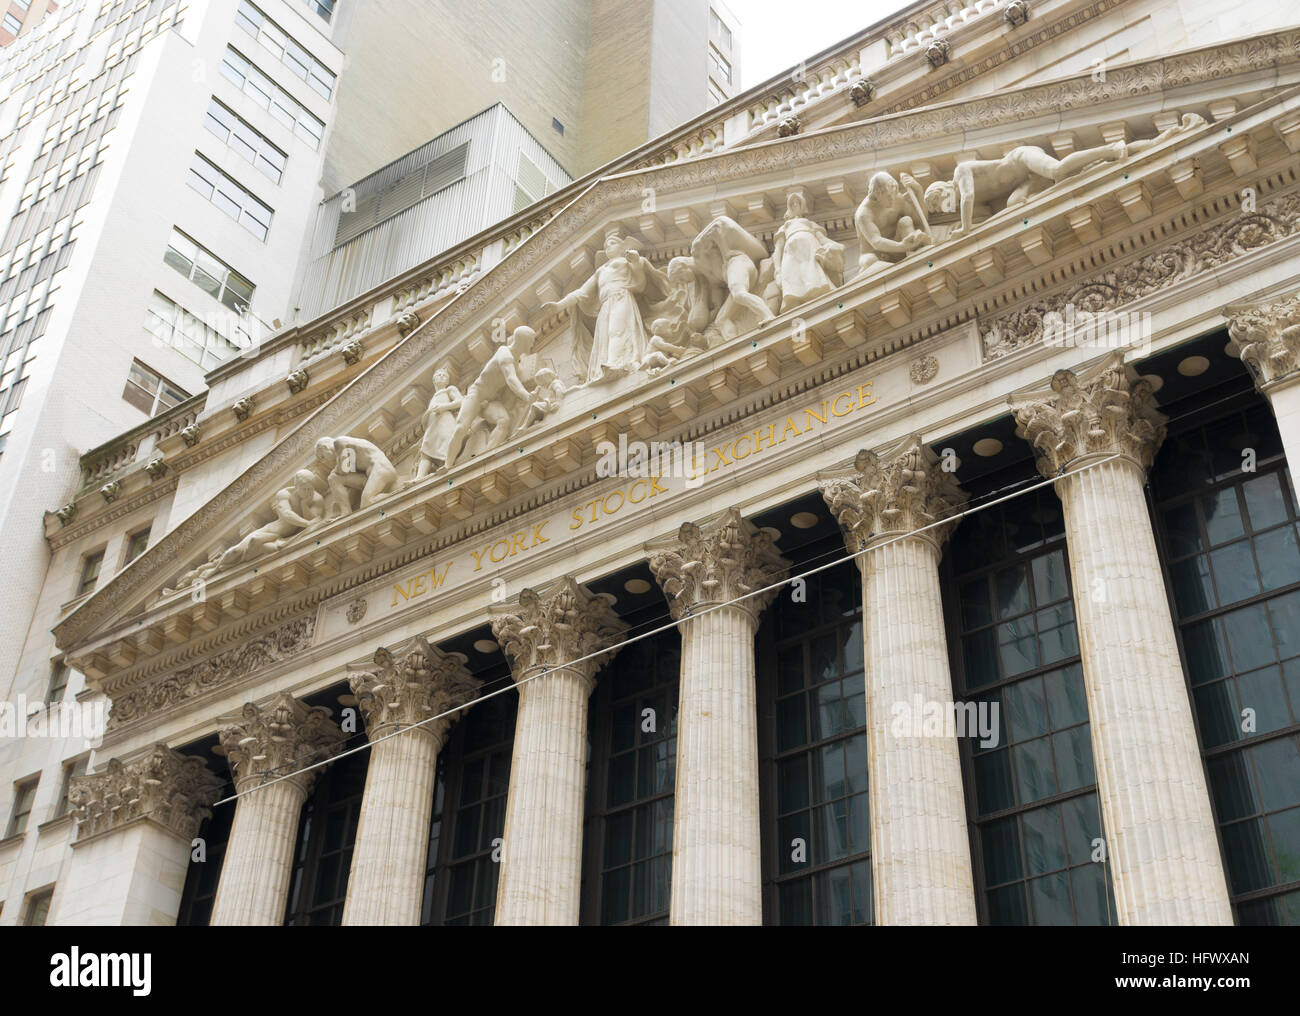 NEW YORK - APRIL 27, 2016:  Exterior of the New York stock exchange building. It is the world's largest stock exchange by market capitalization of its Stock Photo